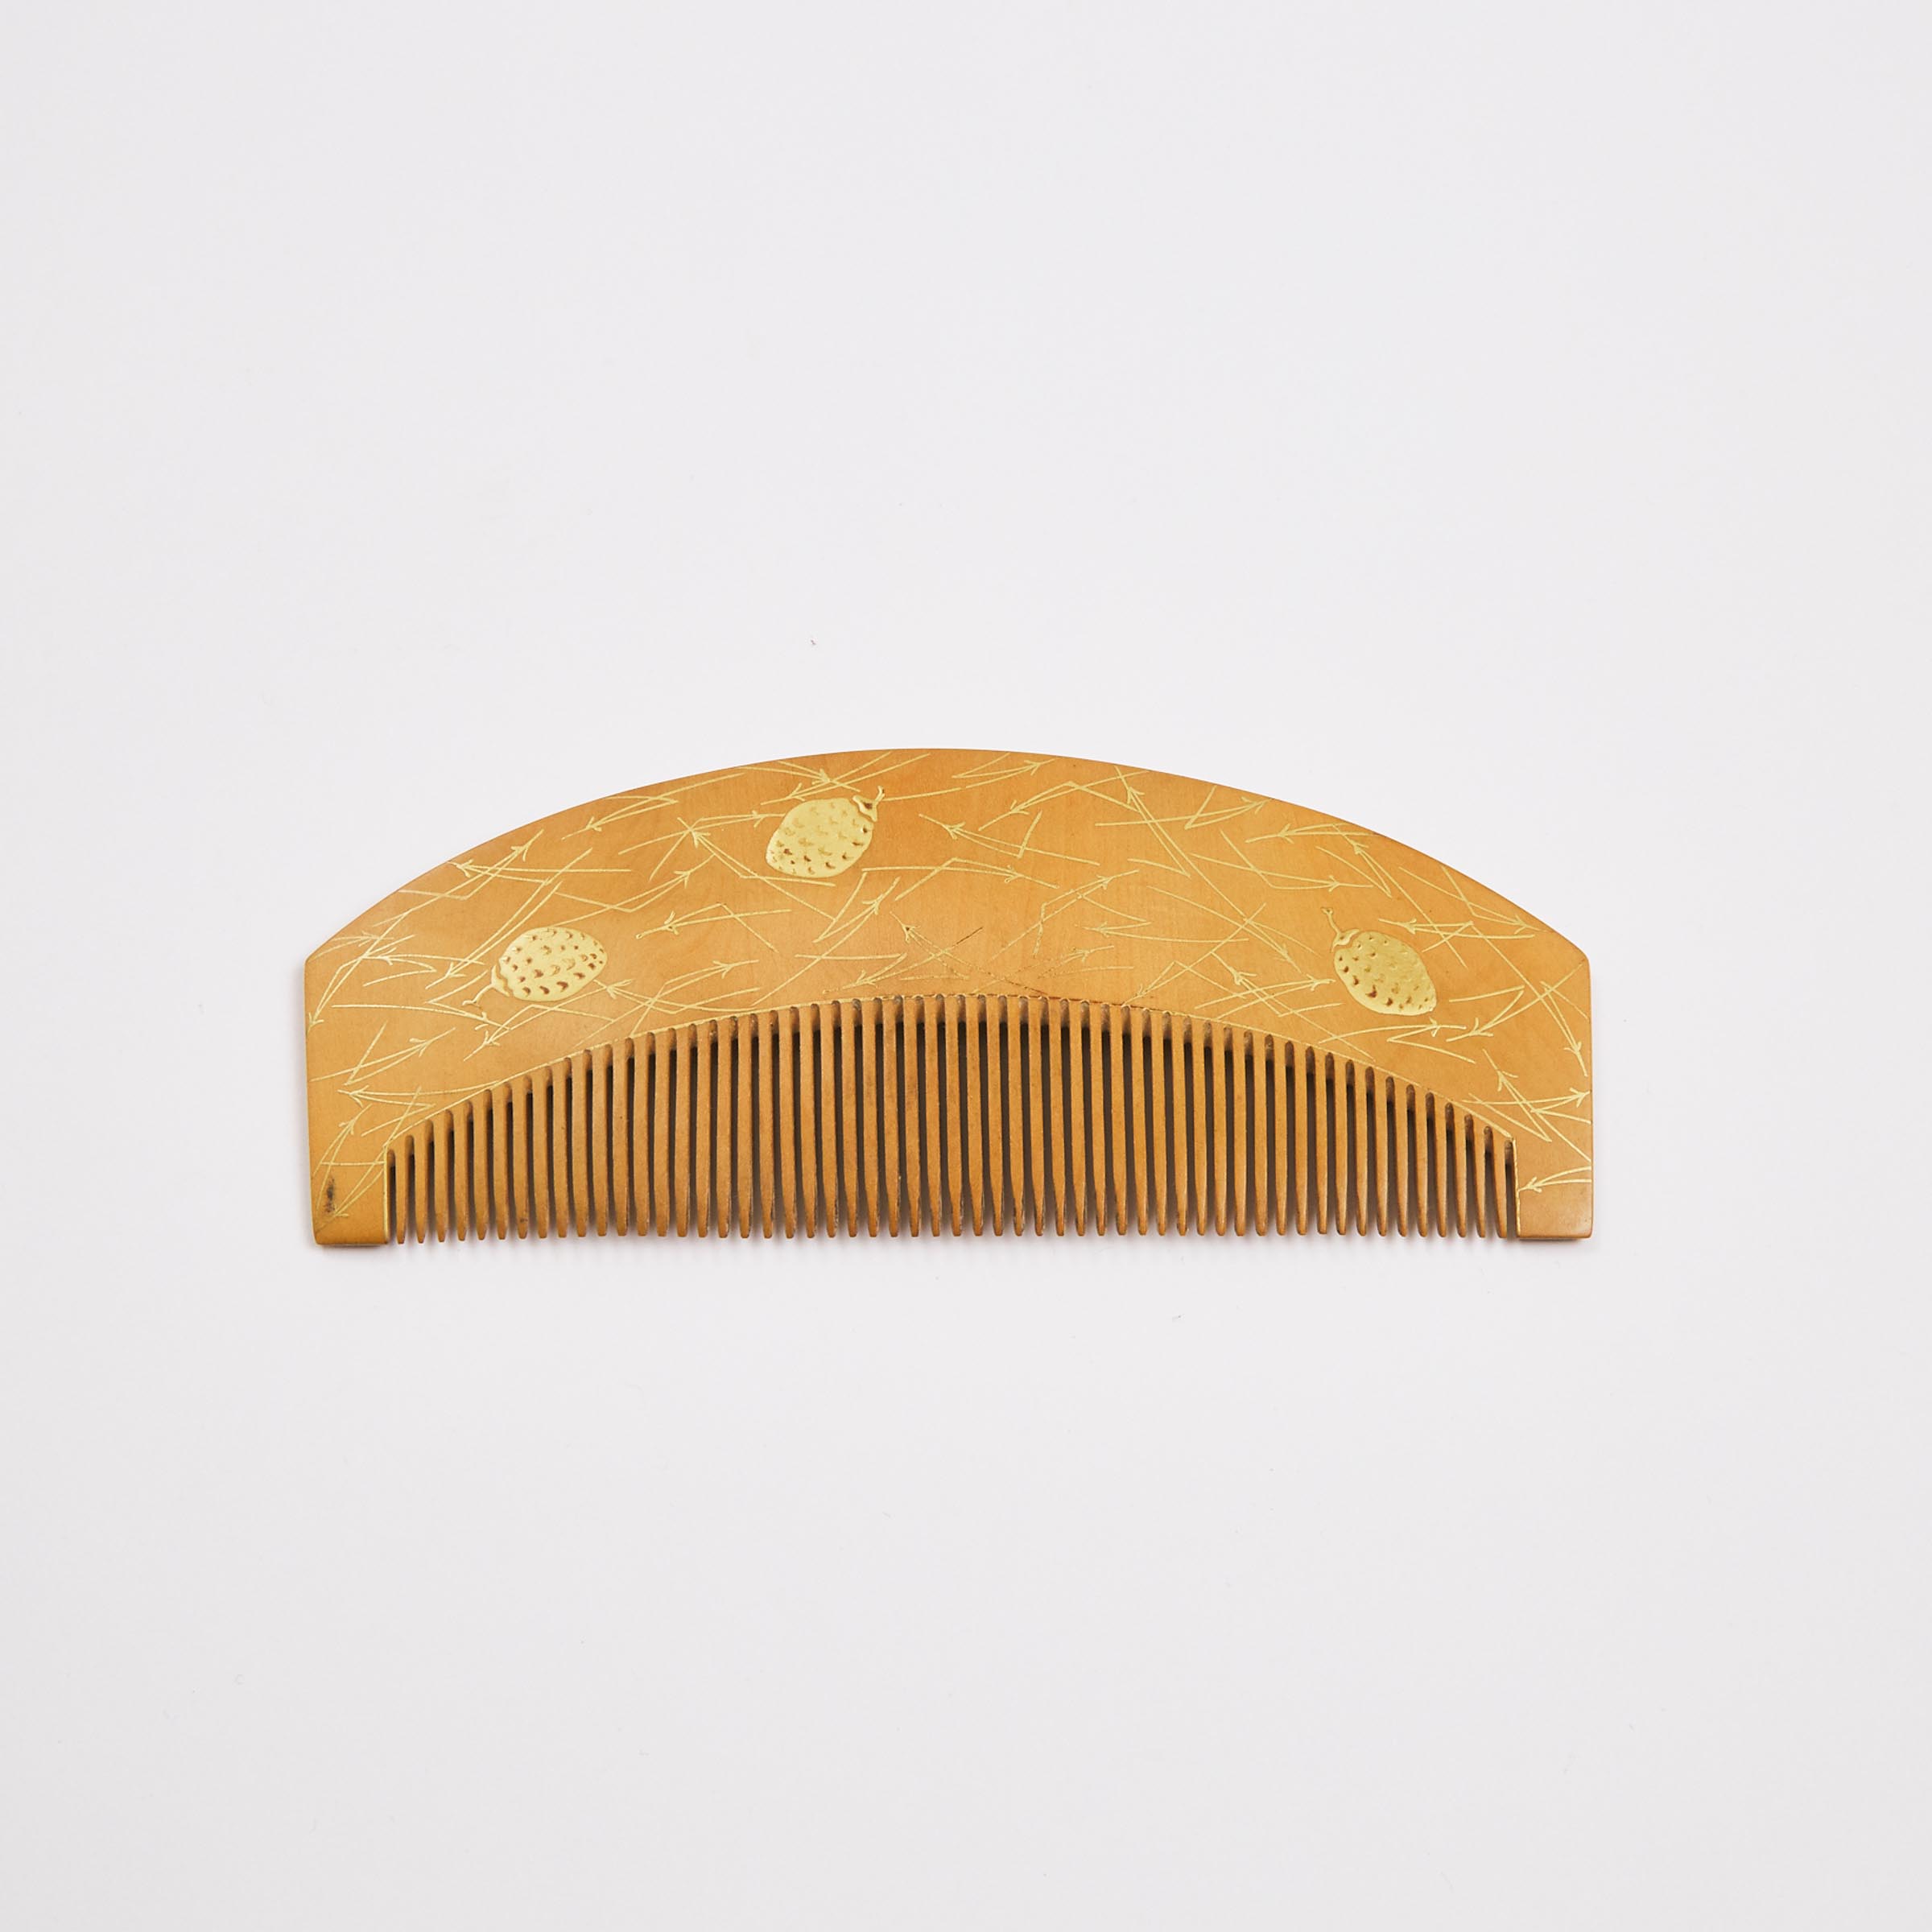 A Japanese Boxwood Comb (Kushi) with Berry Design in Gold, Meiji Period